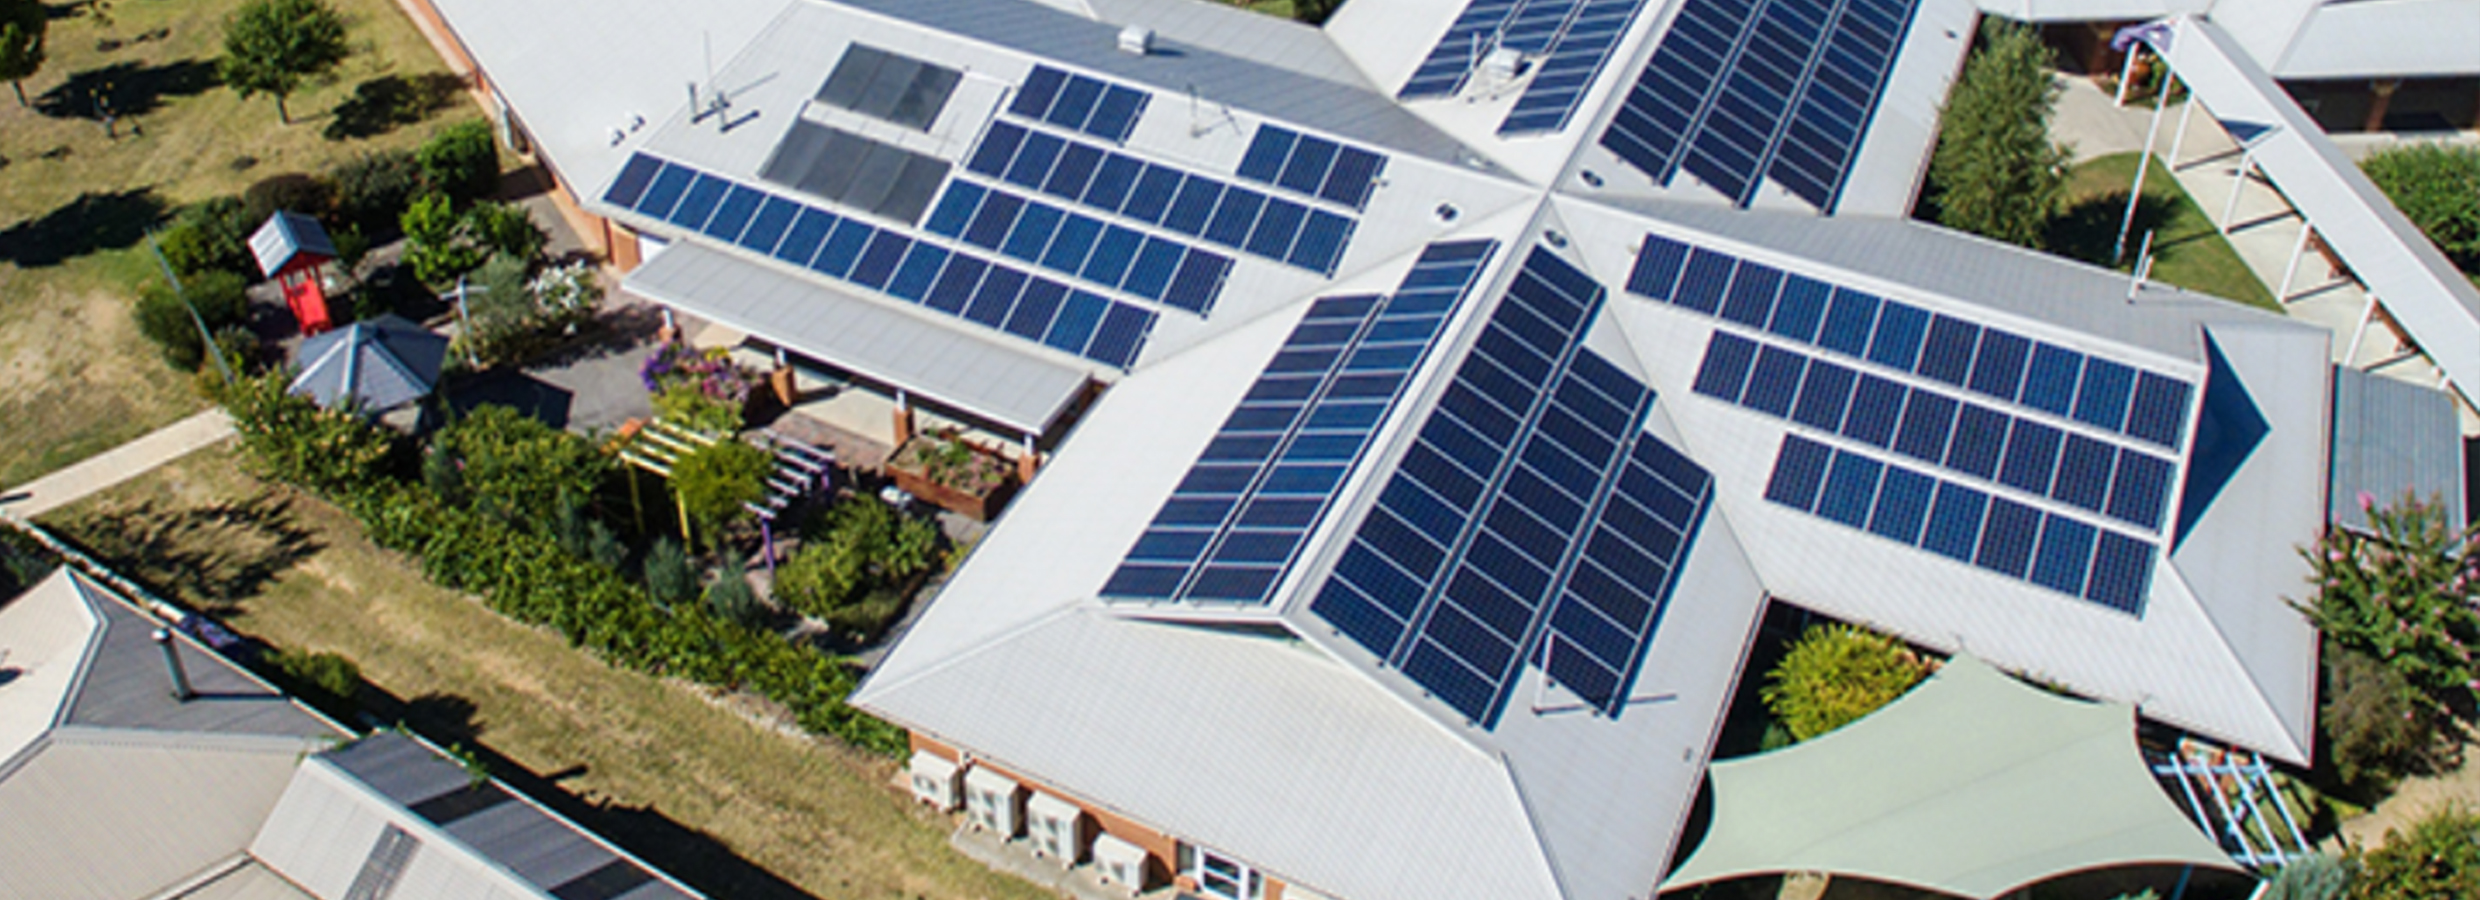 New Charges for Homes with Solar: Impact on Australia's Grid - featured image